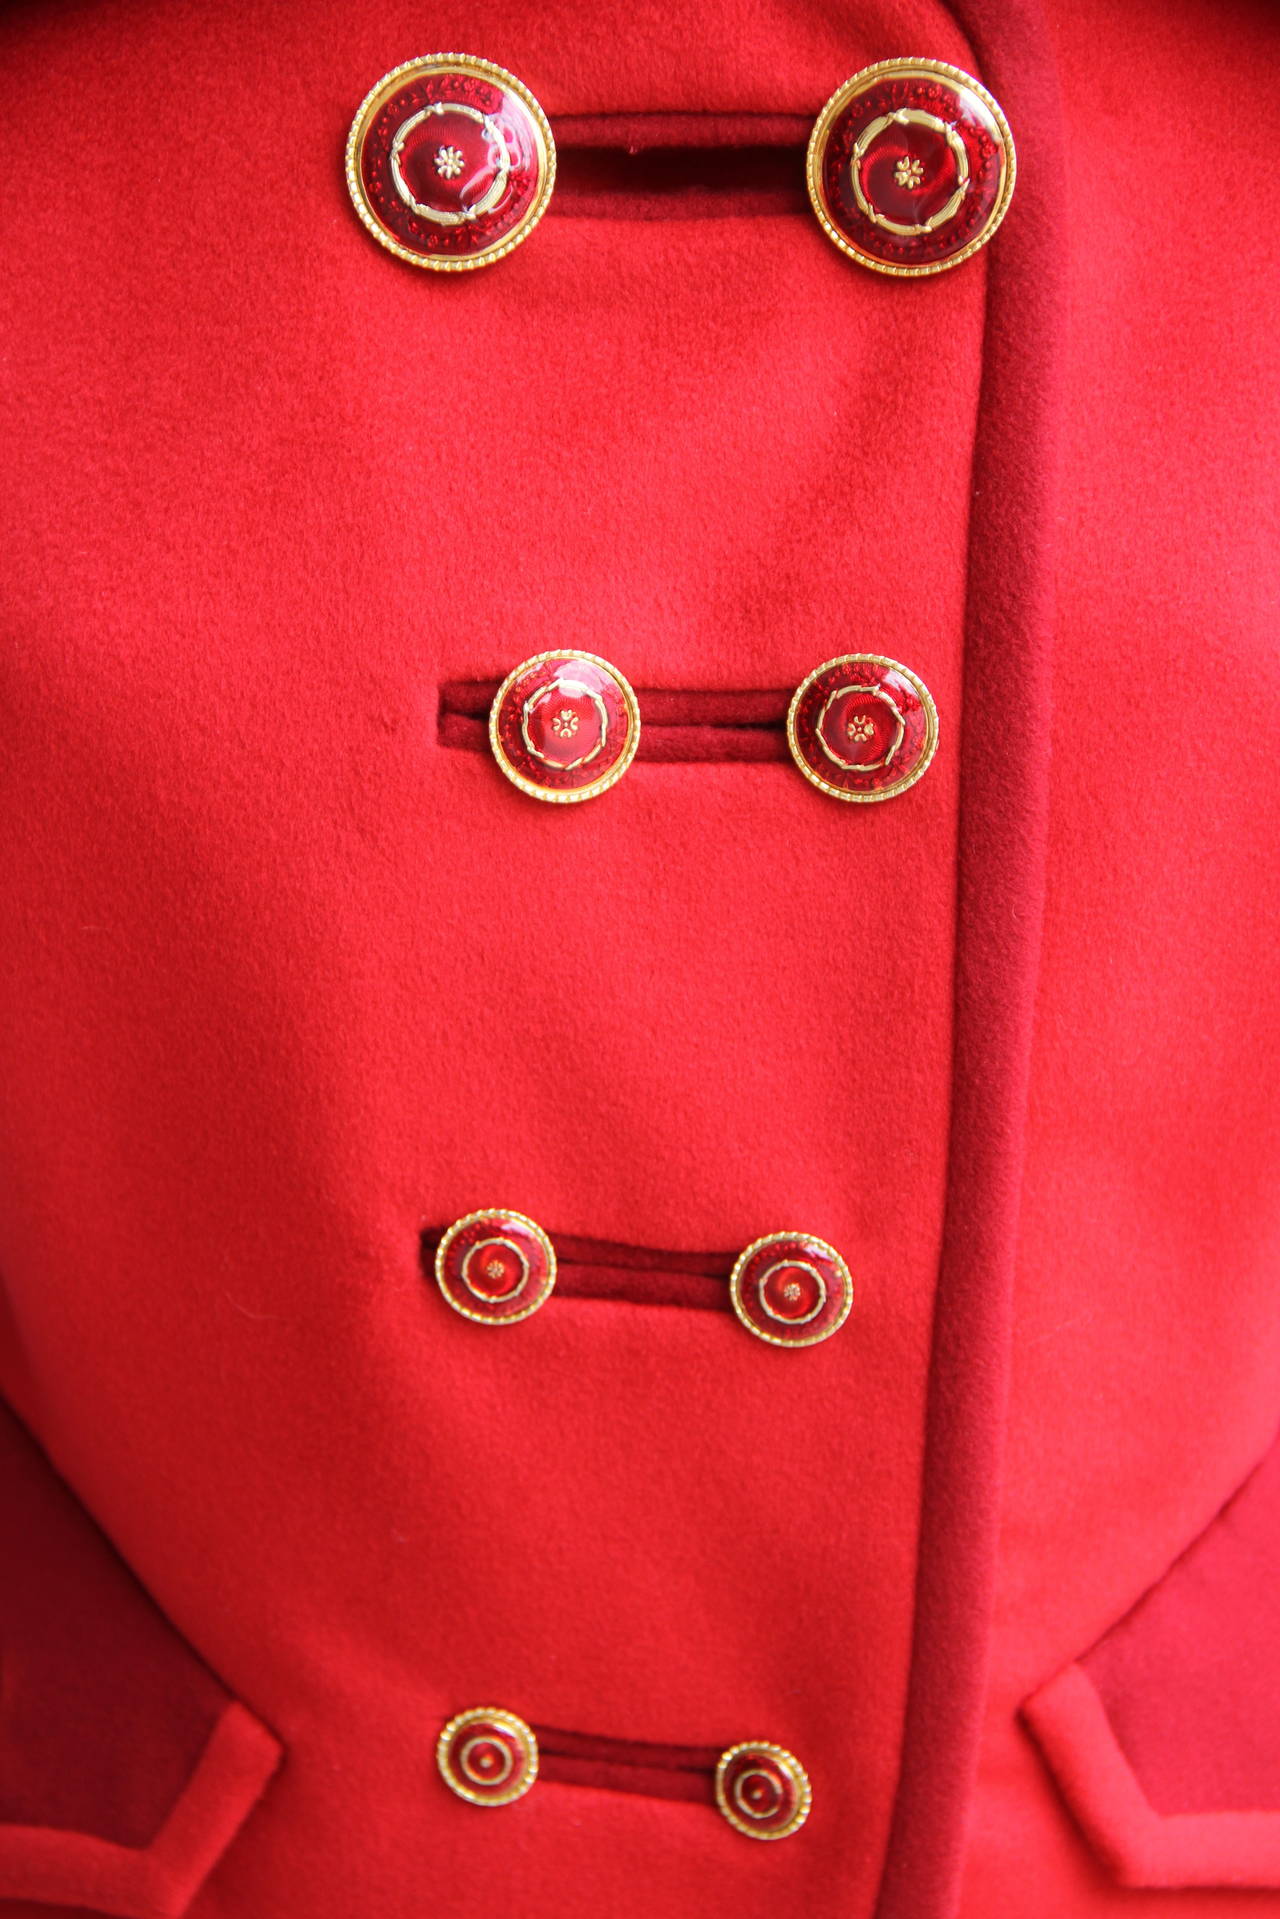 A dramatic and rare Atelier Versace Nautical collection double-breasted scarlet wool jacket, with contrast red wool detailing, from the Spring 1993 Haute Couture collection, shown at The Ritz in Paris.

The jacket features two rows of gilt metal